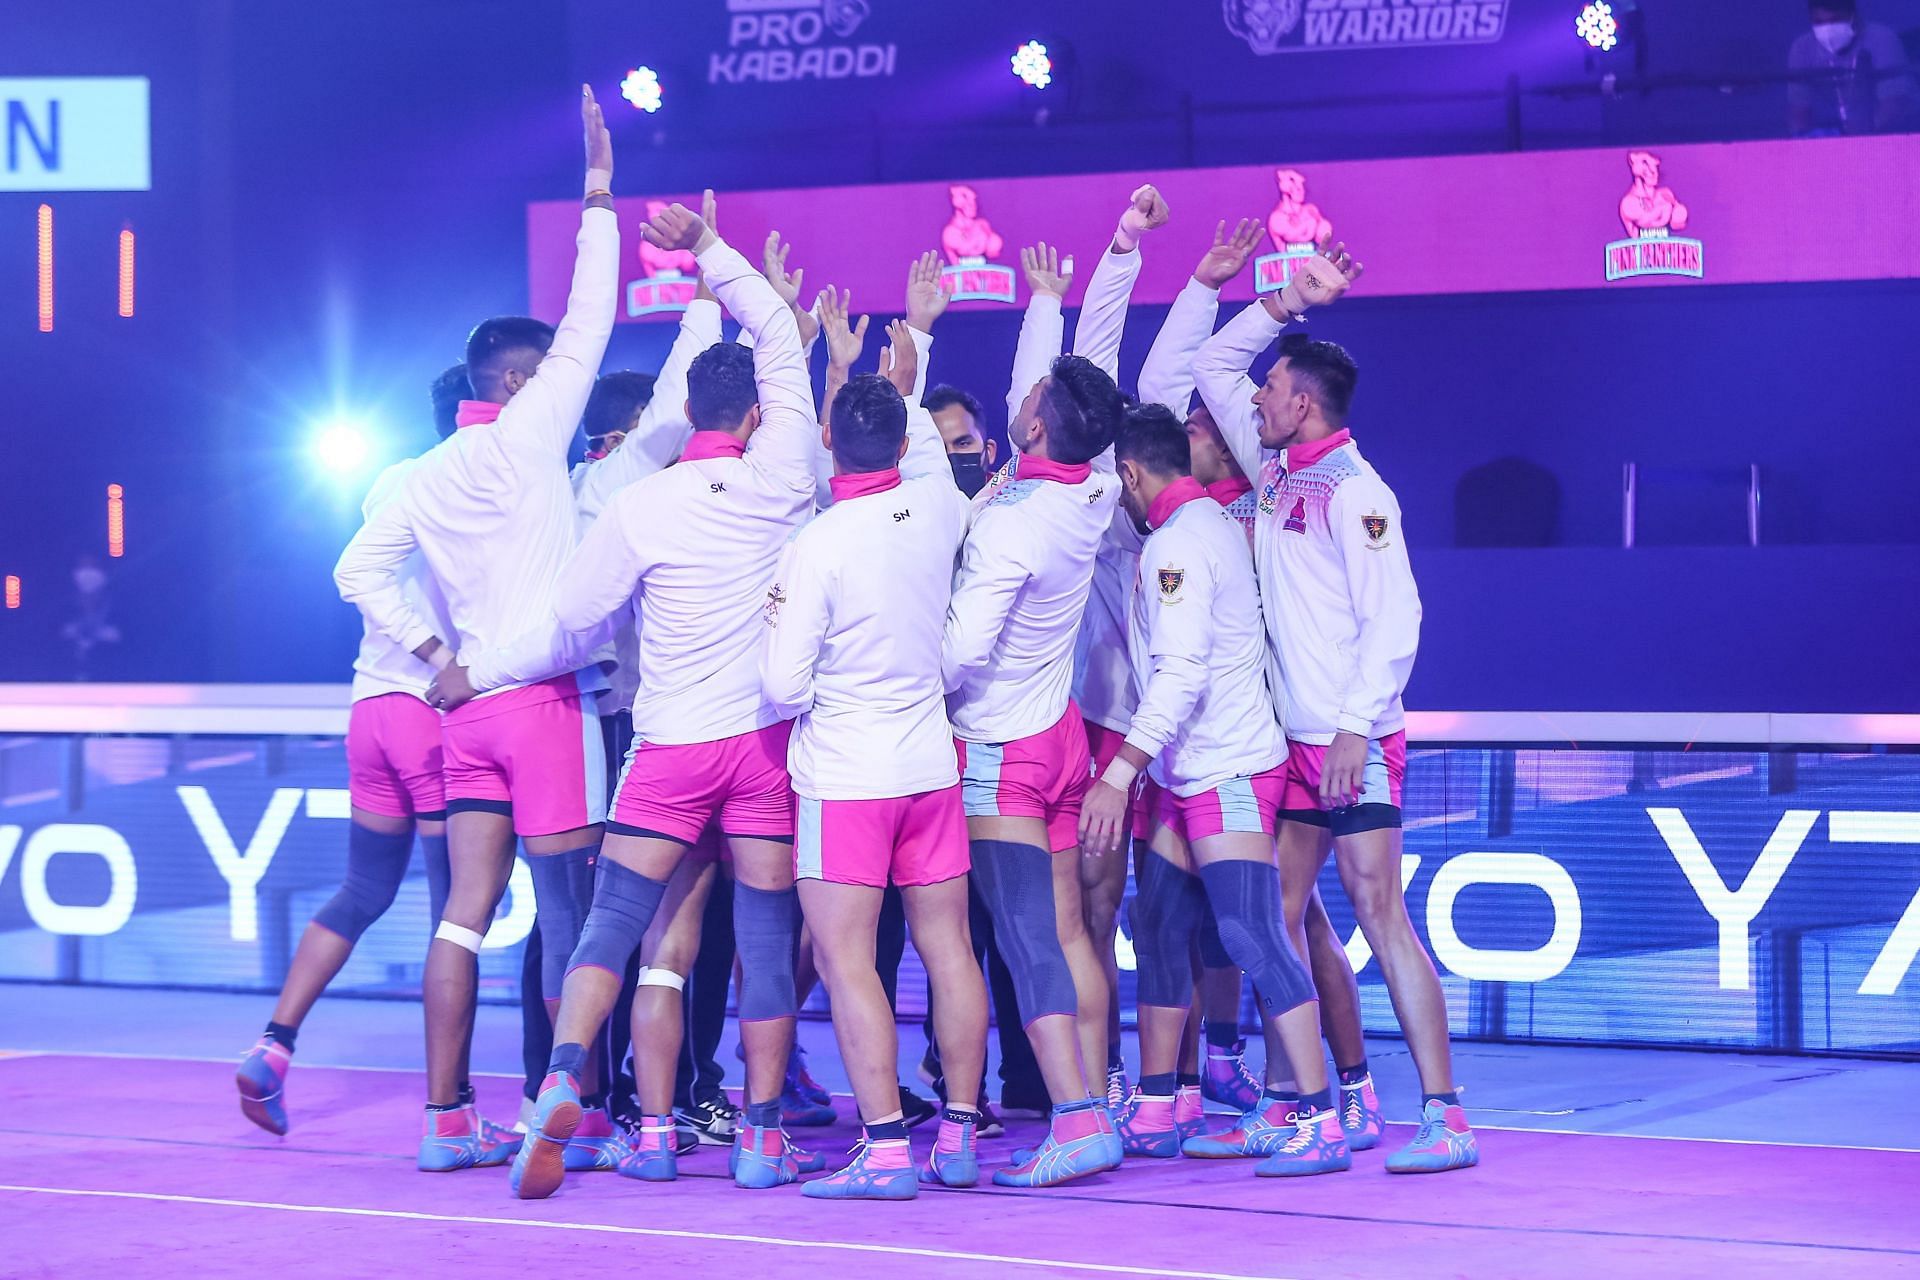 Pro Kabaddi 2022, Gujarat Giants vs Jaipur Pink Panthers: Who will win today’s PKL match and telecast details